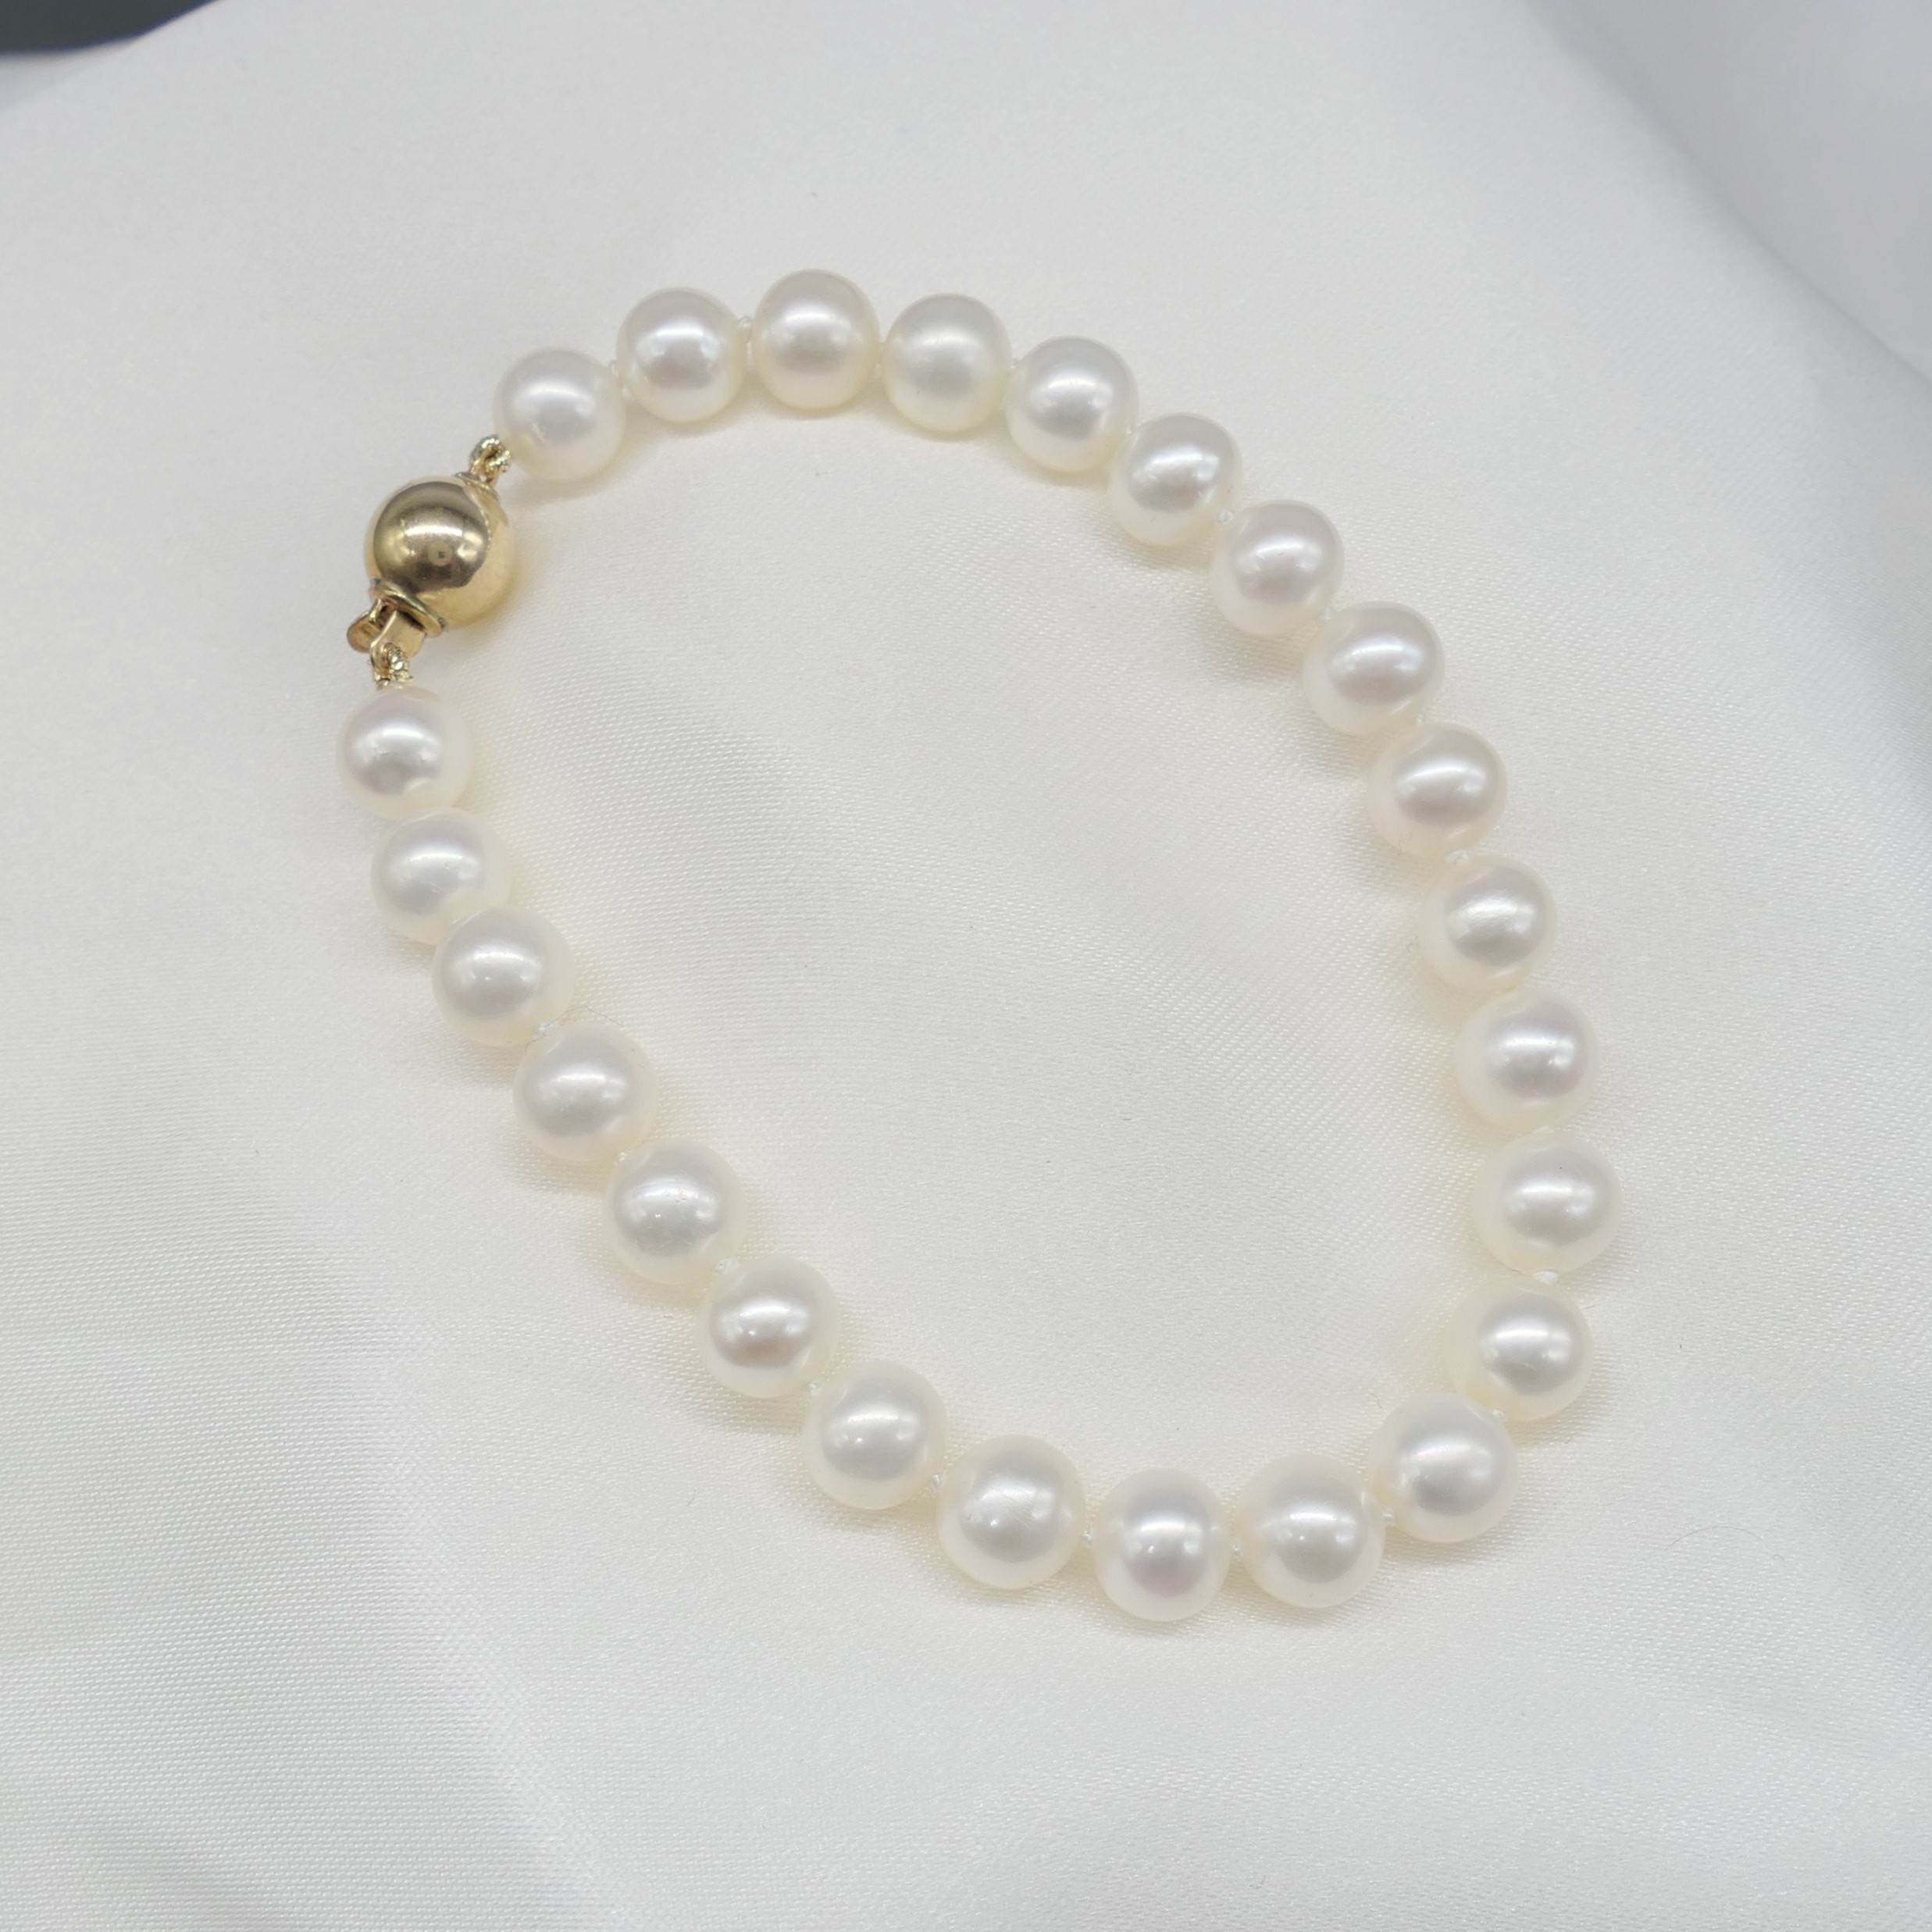 White Cultured Pearl Strung Bracelet With Yellow Gold Ball Clasp - Image 4 of 6